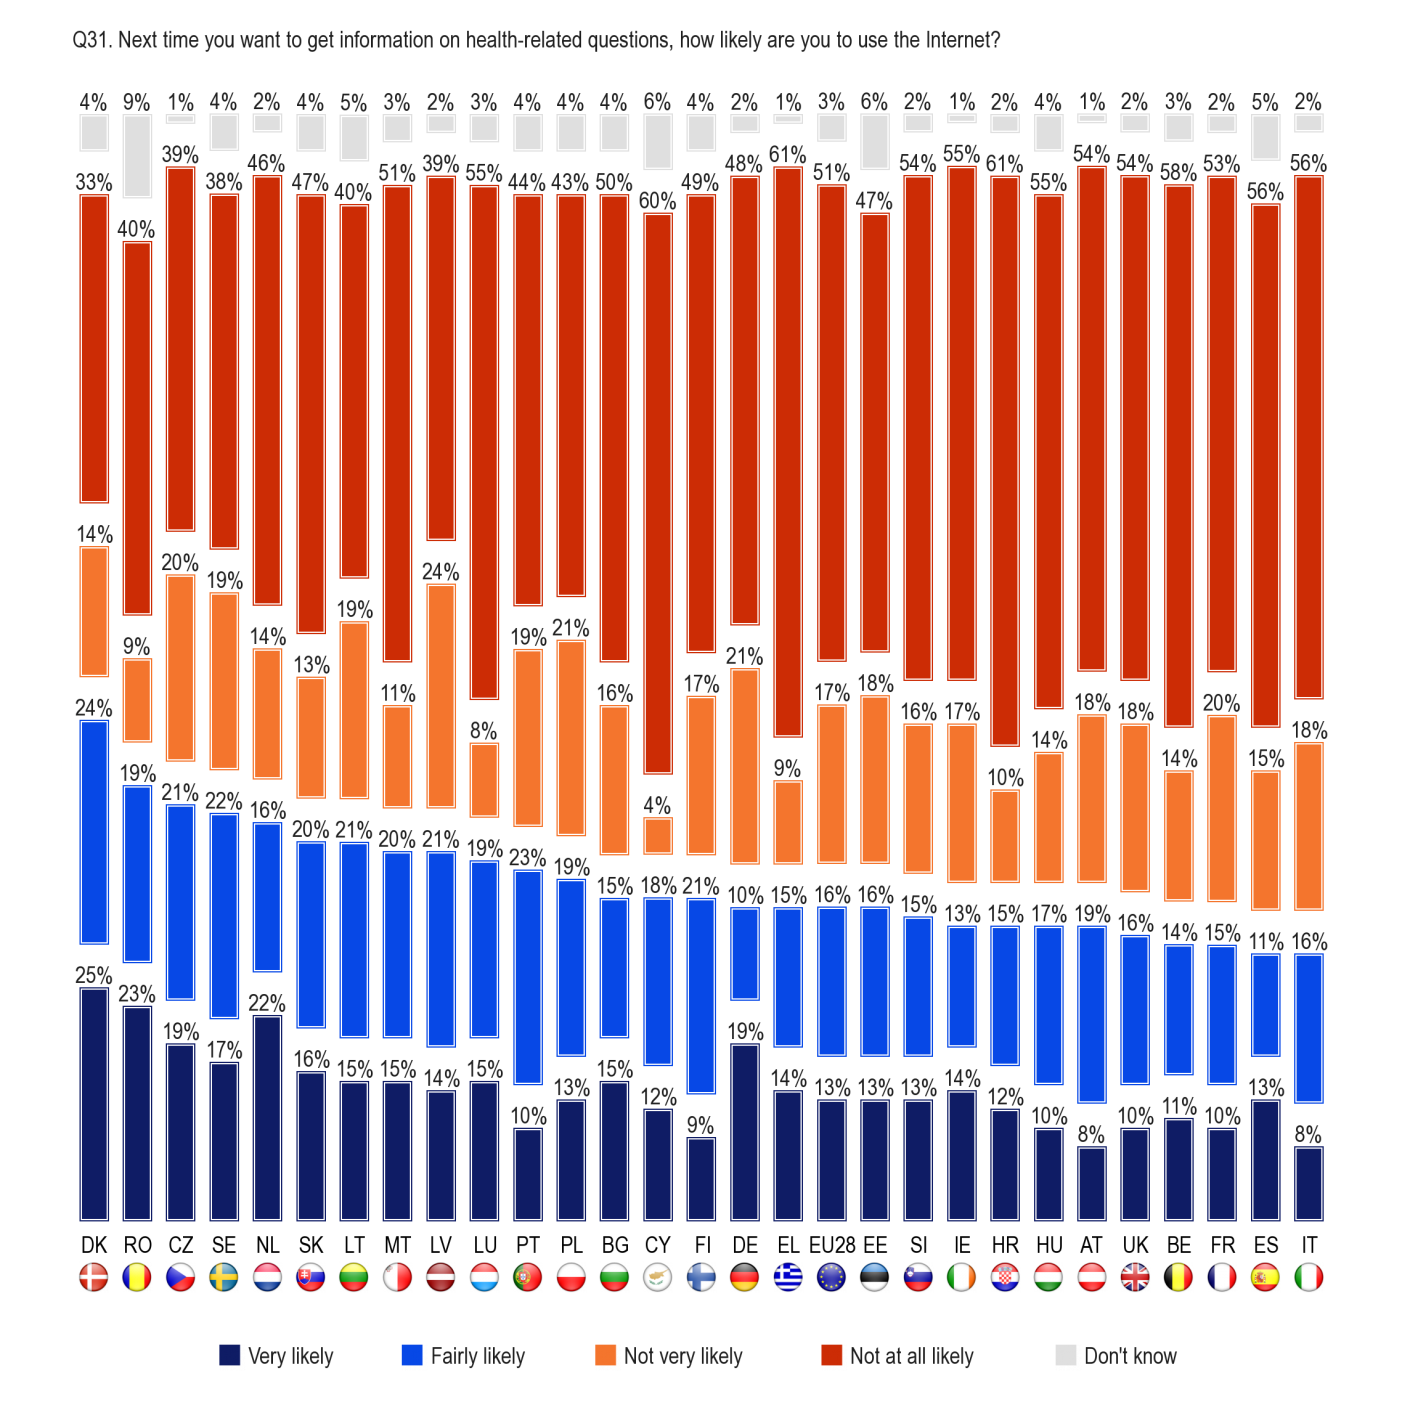 FLASH EUROBAROMETER Base: Respondents who did not use the Internet to search for health-related information within the last 12 months (N=10884) The socio-demographic data show that: Among respondents